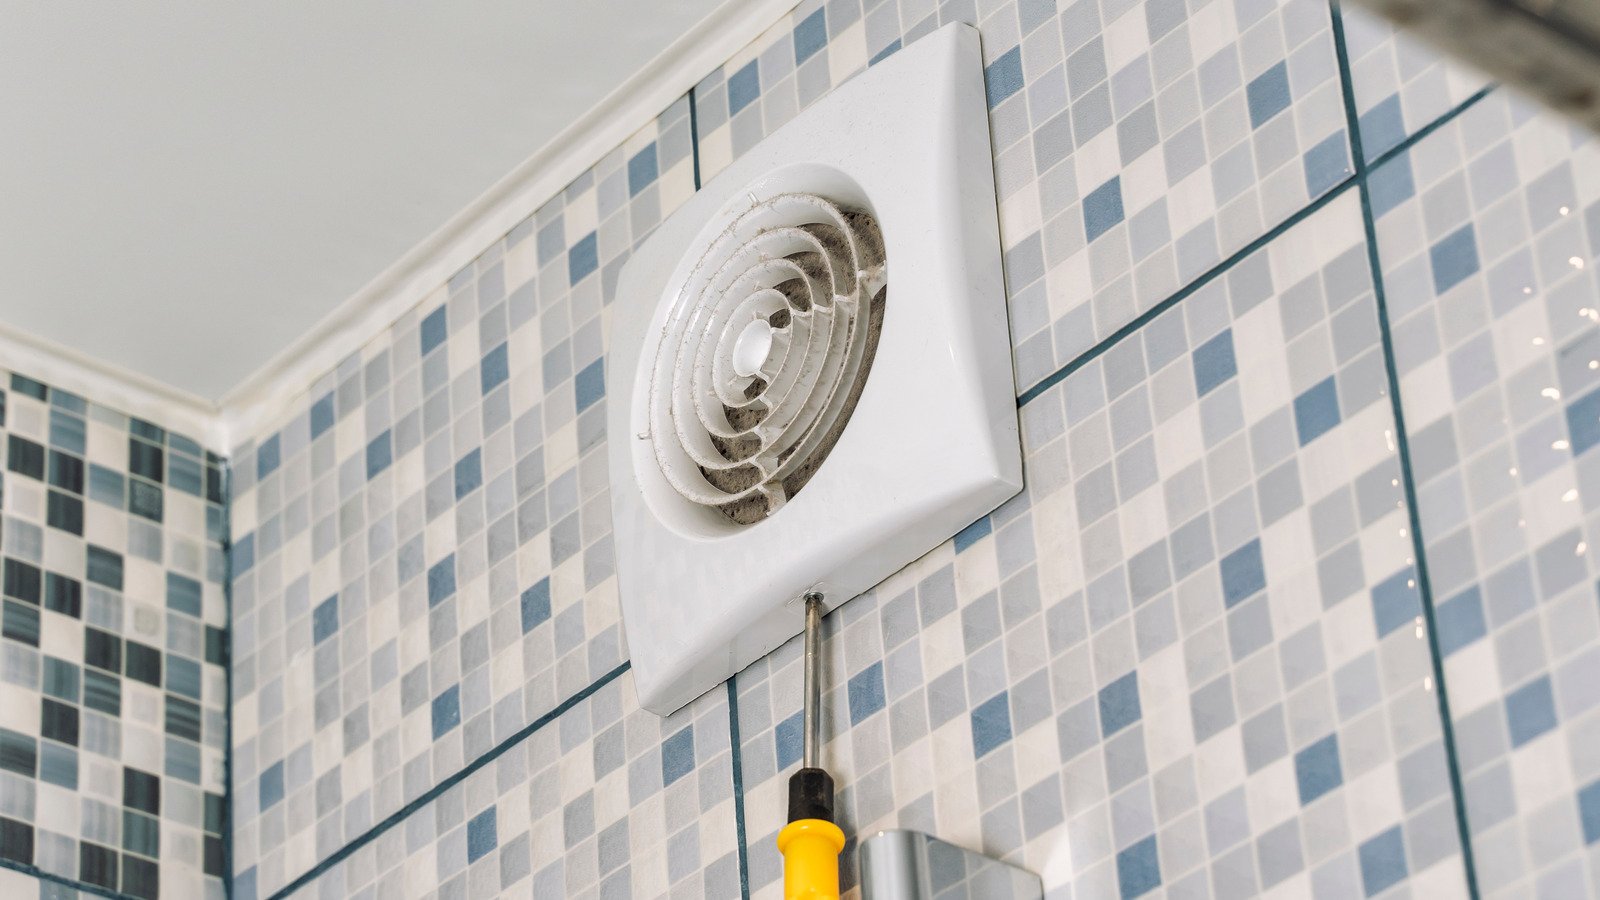 How To Fix Water Dripping From Bathroom Fan